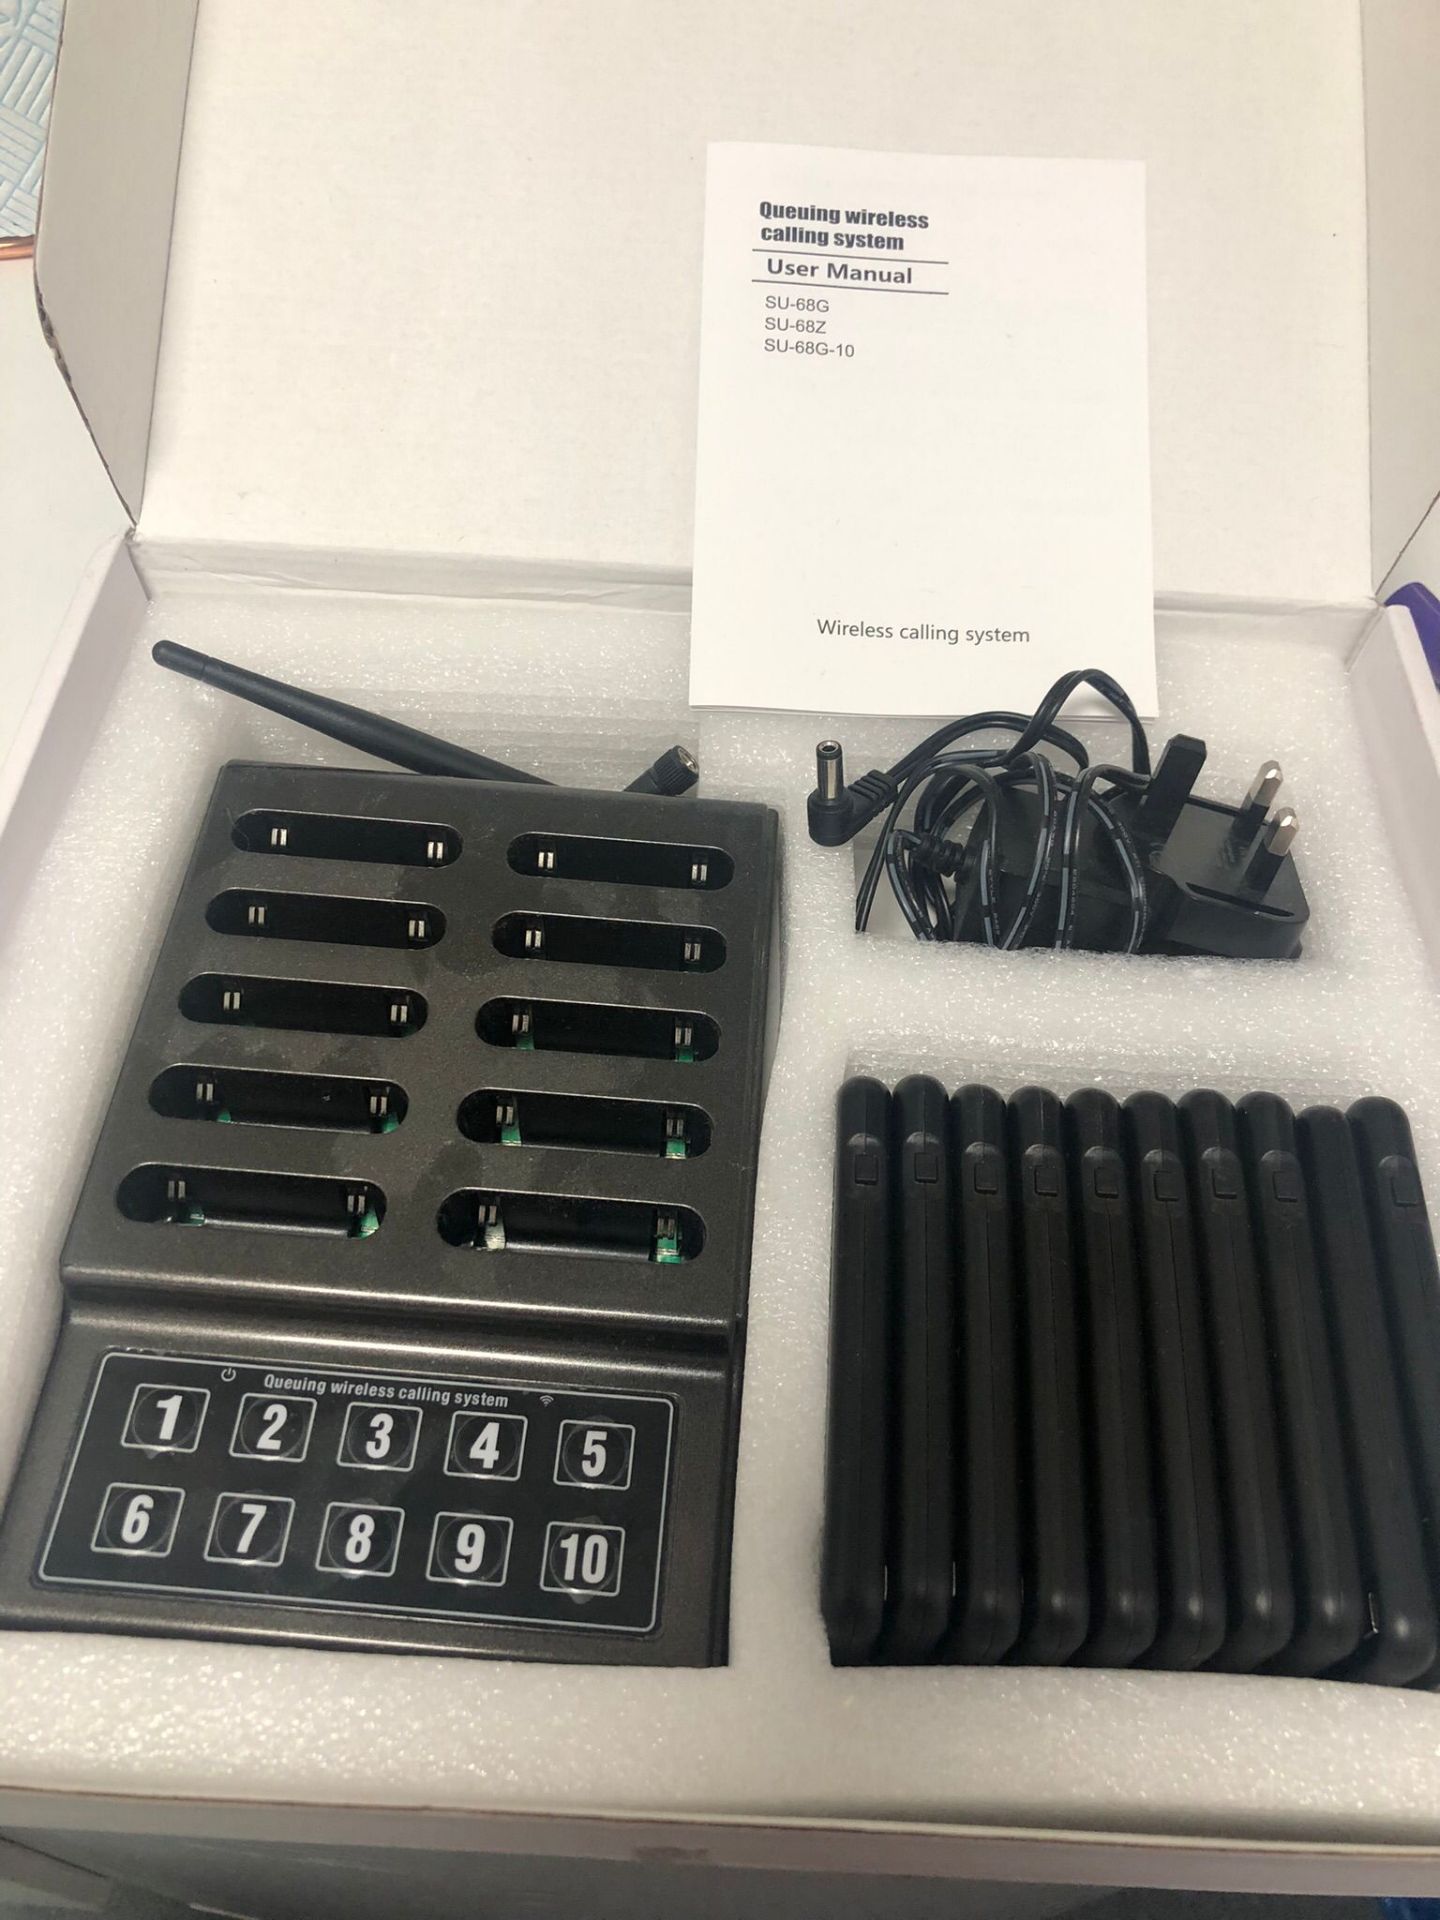 10-Channel queuing wireless calling receiver syste